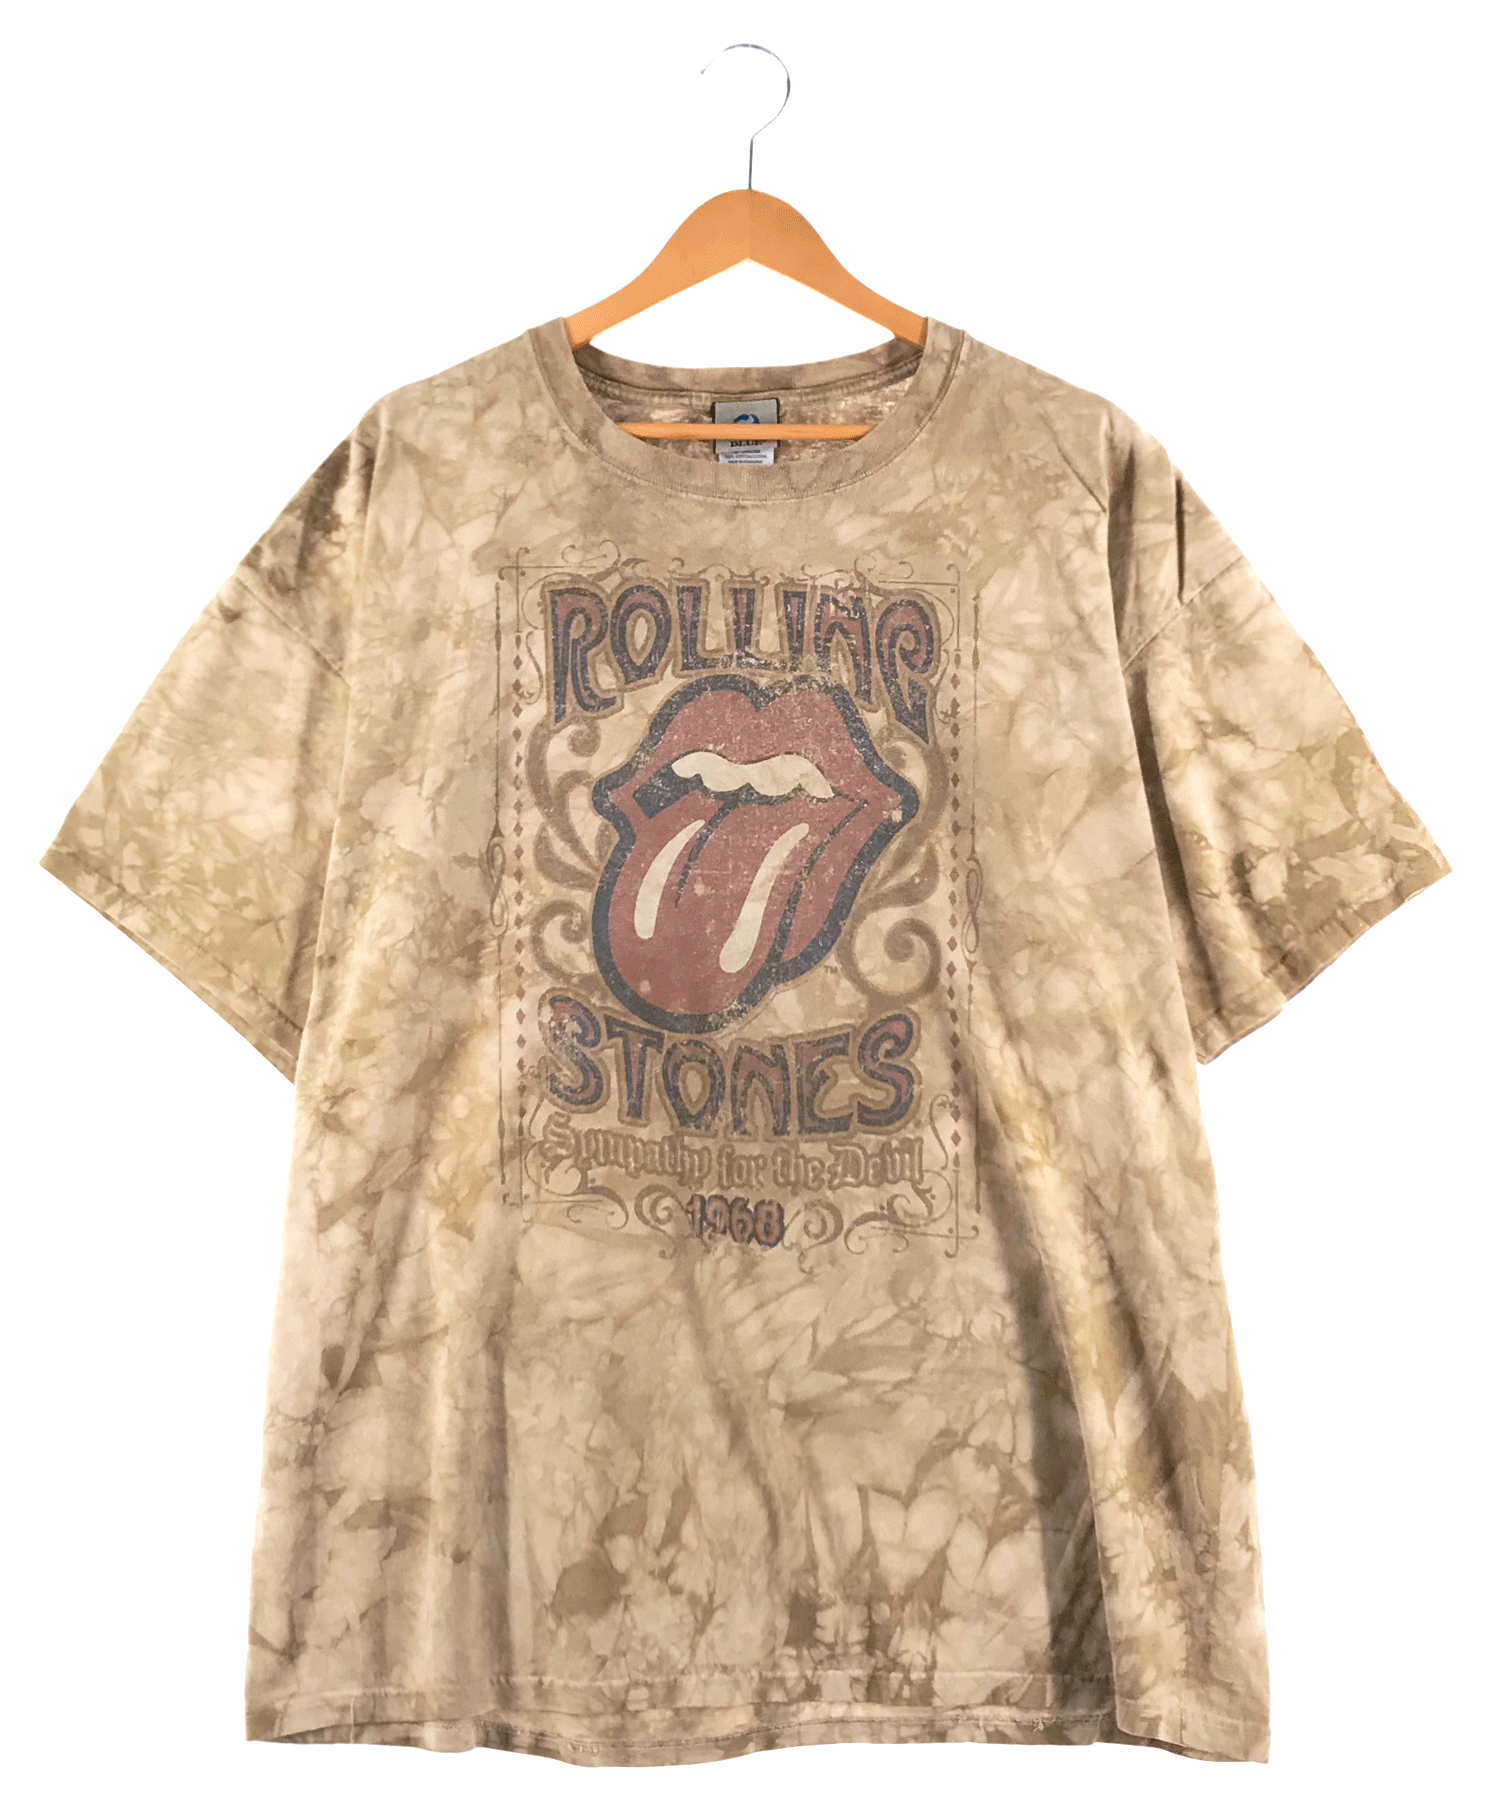 THE ROLLING STONES バンドＴシャツSympathy for the Devil 1968